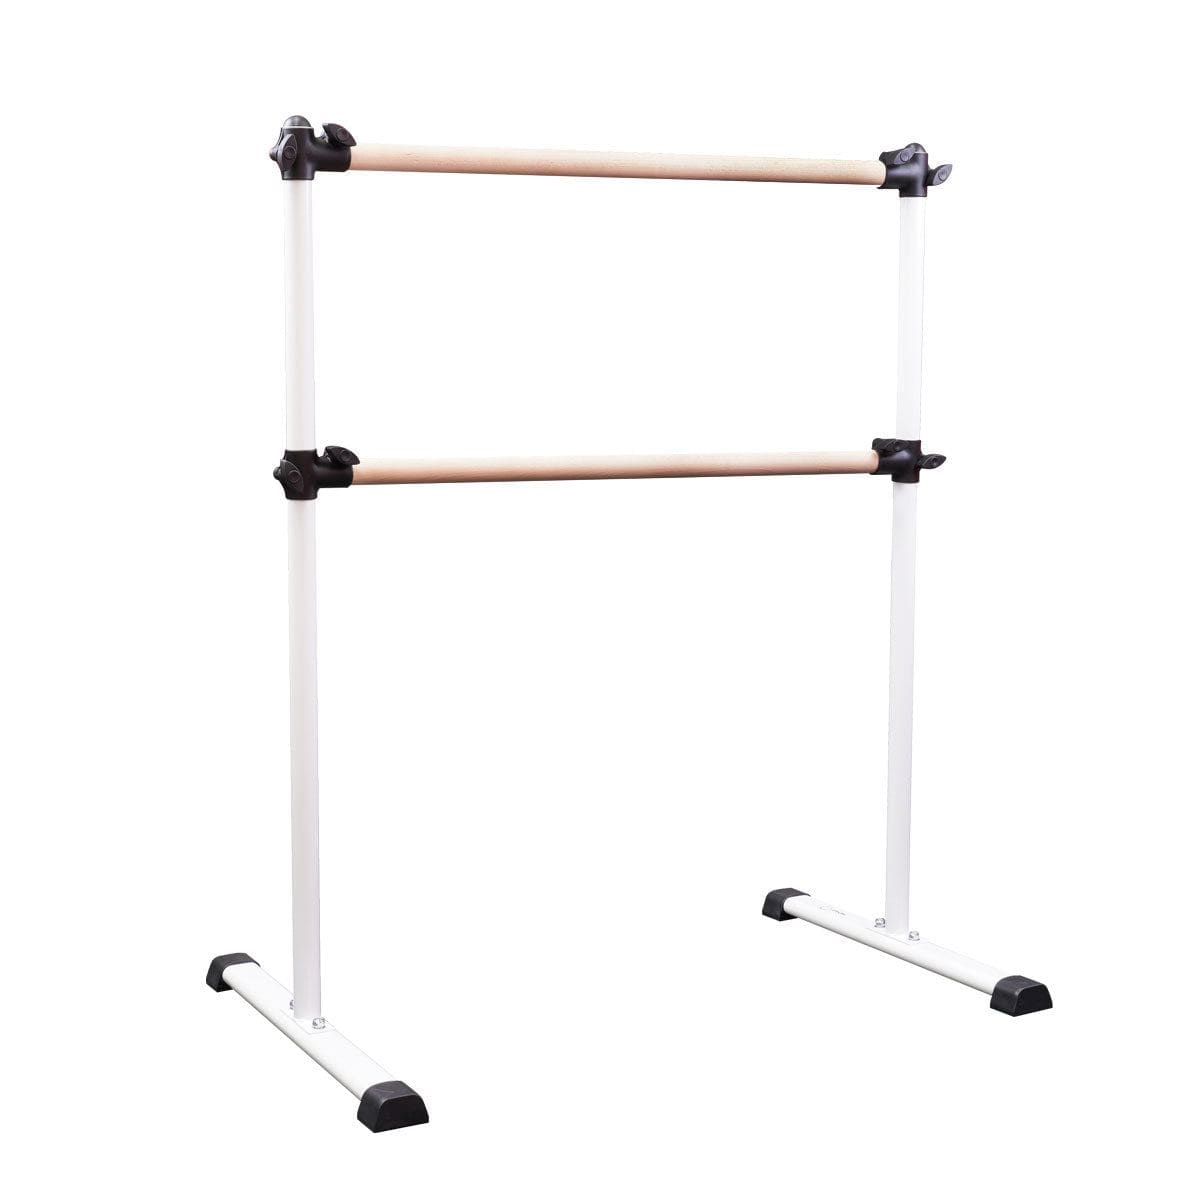 Feet Portable Ballet Barre With Adjustable Height